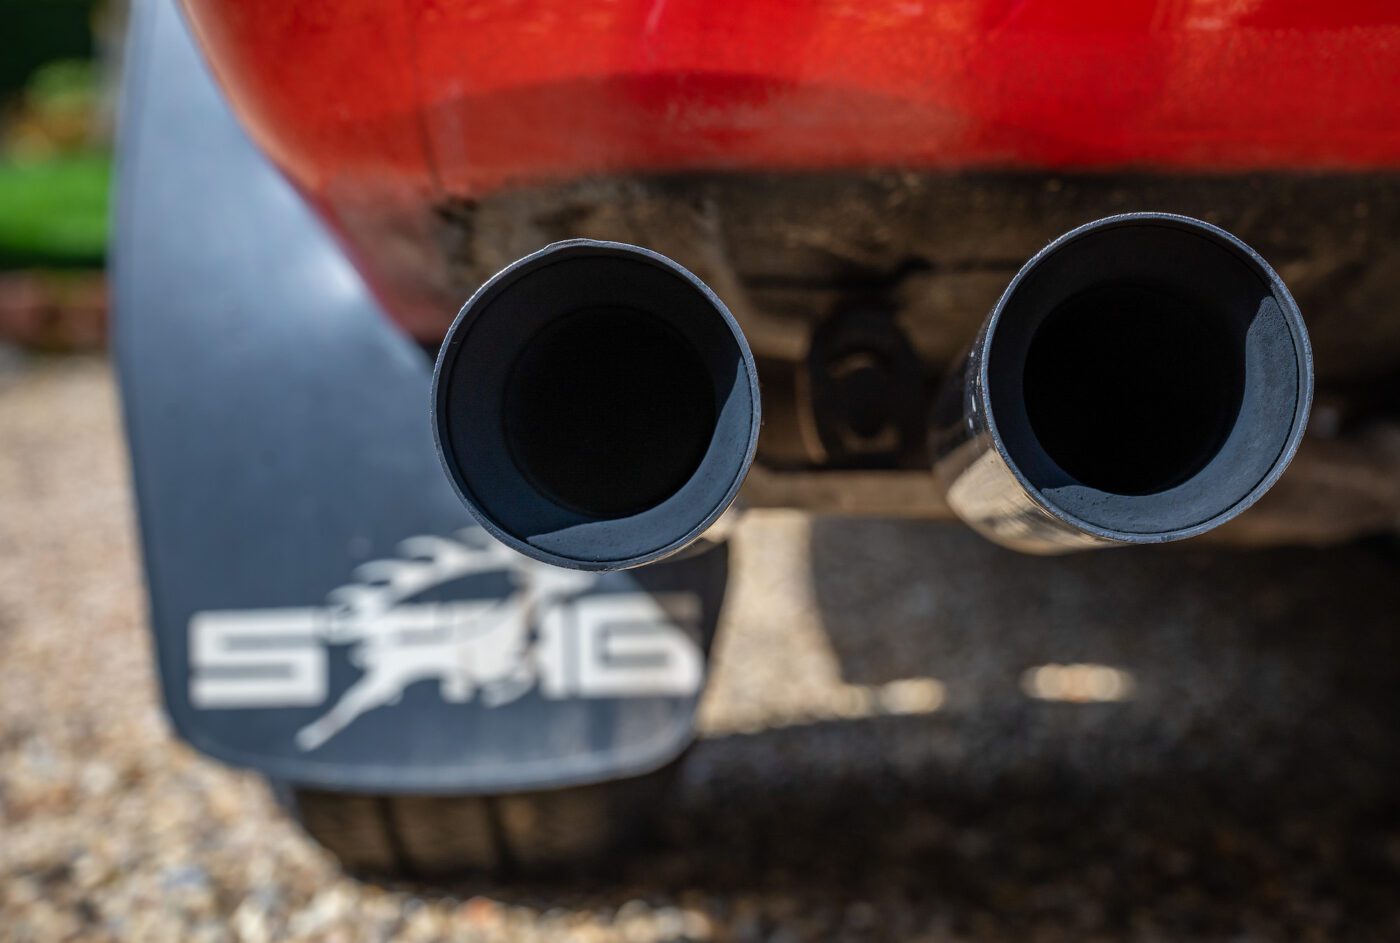 Triumph Stag tailpipes